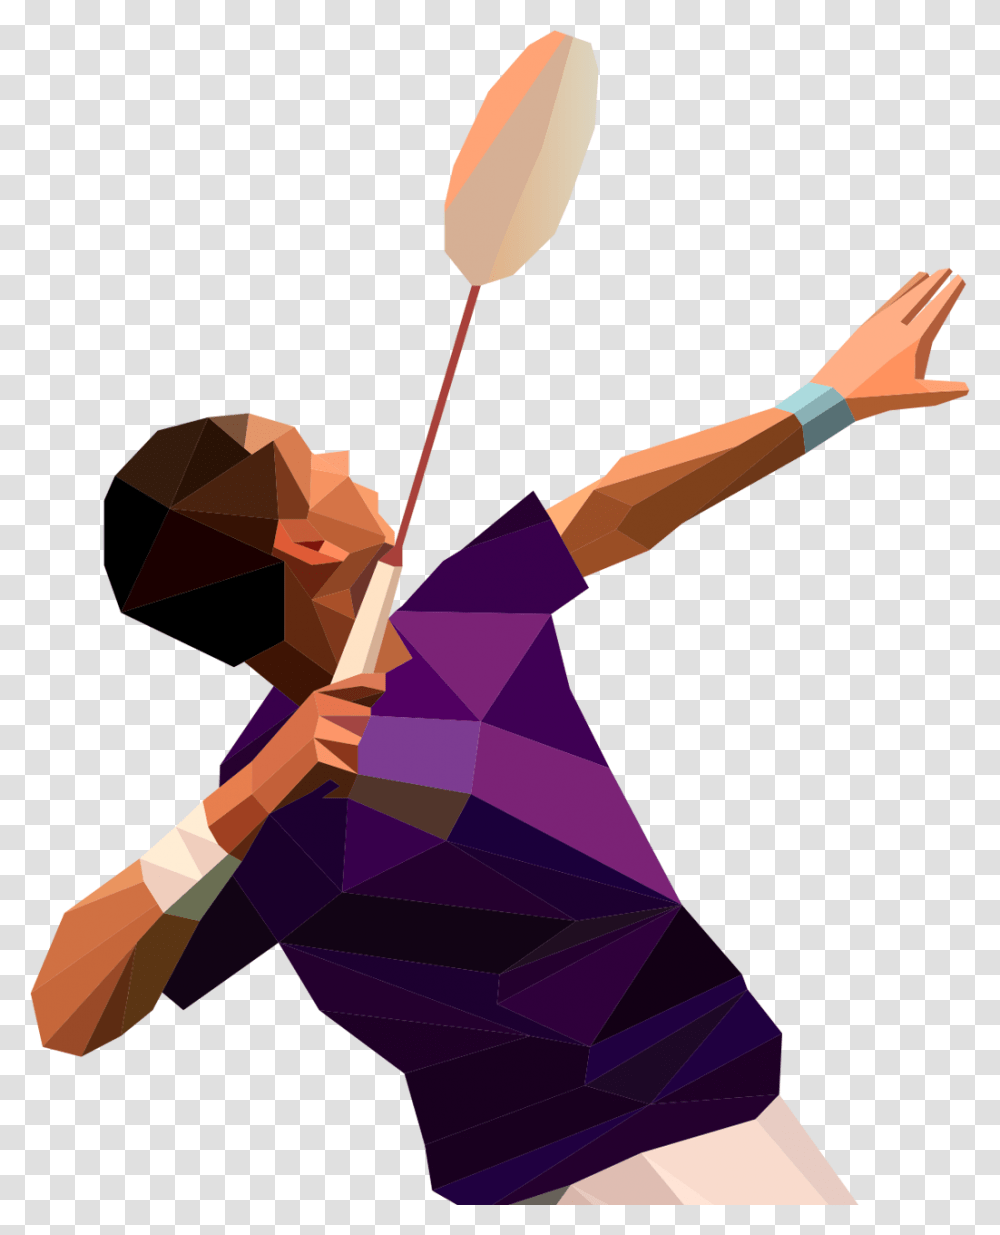 Psd To Html Badminton Player Vector, Arm, Photography, Hat Transparent Png